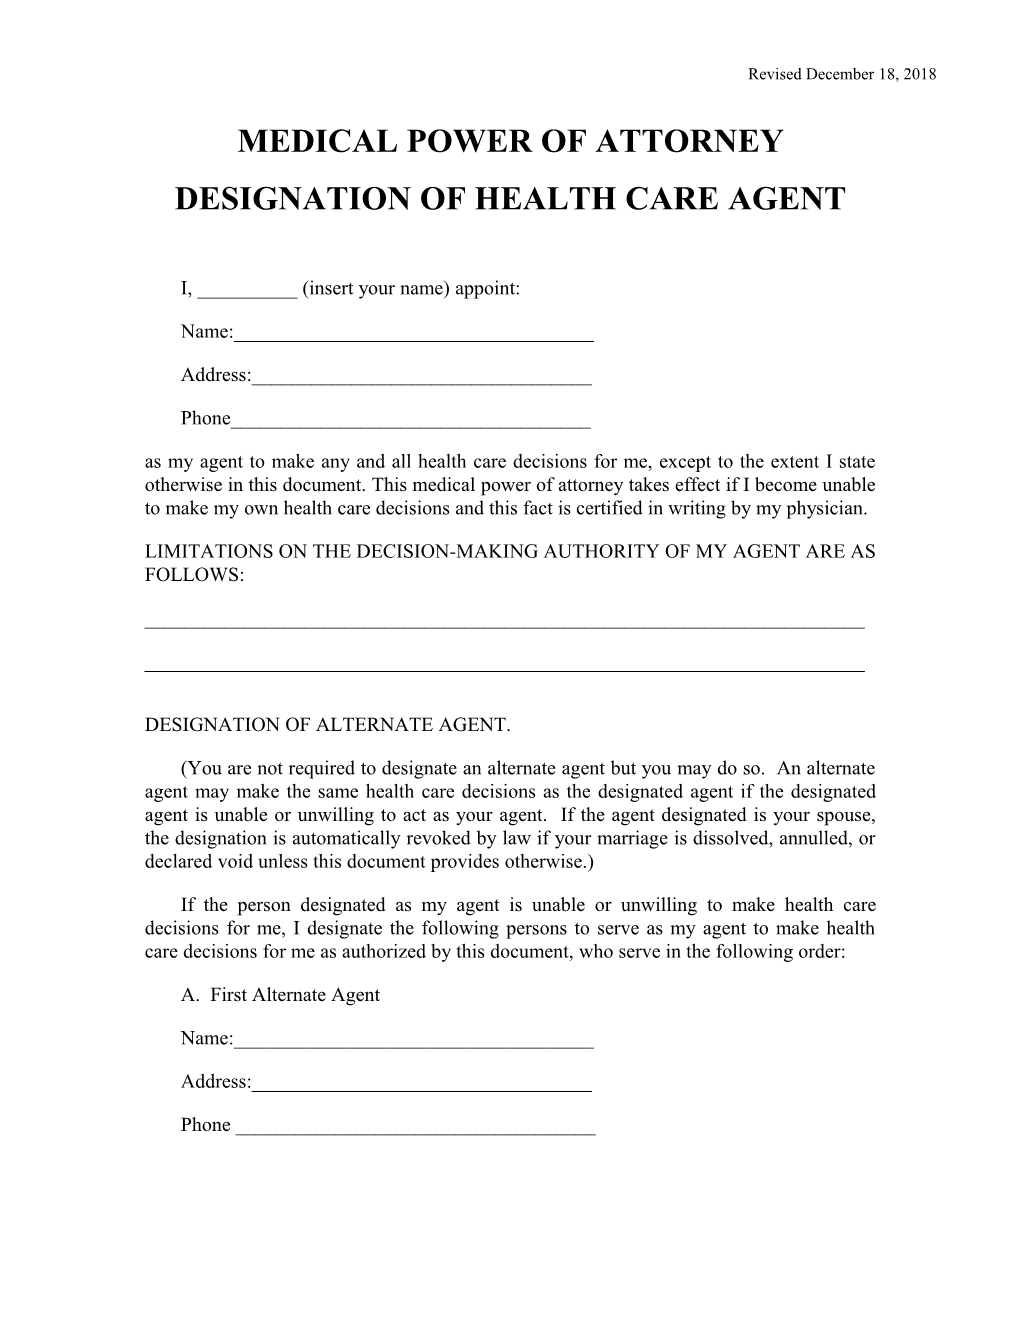 Medical Power of Attorney Designation of Health Care Agent